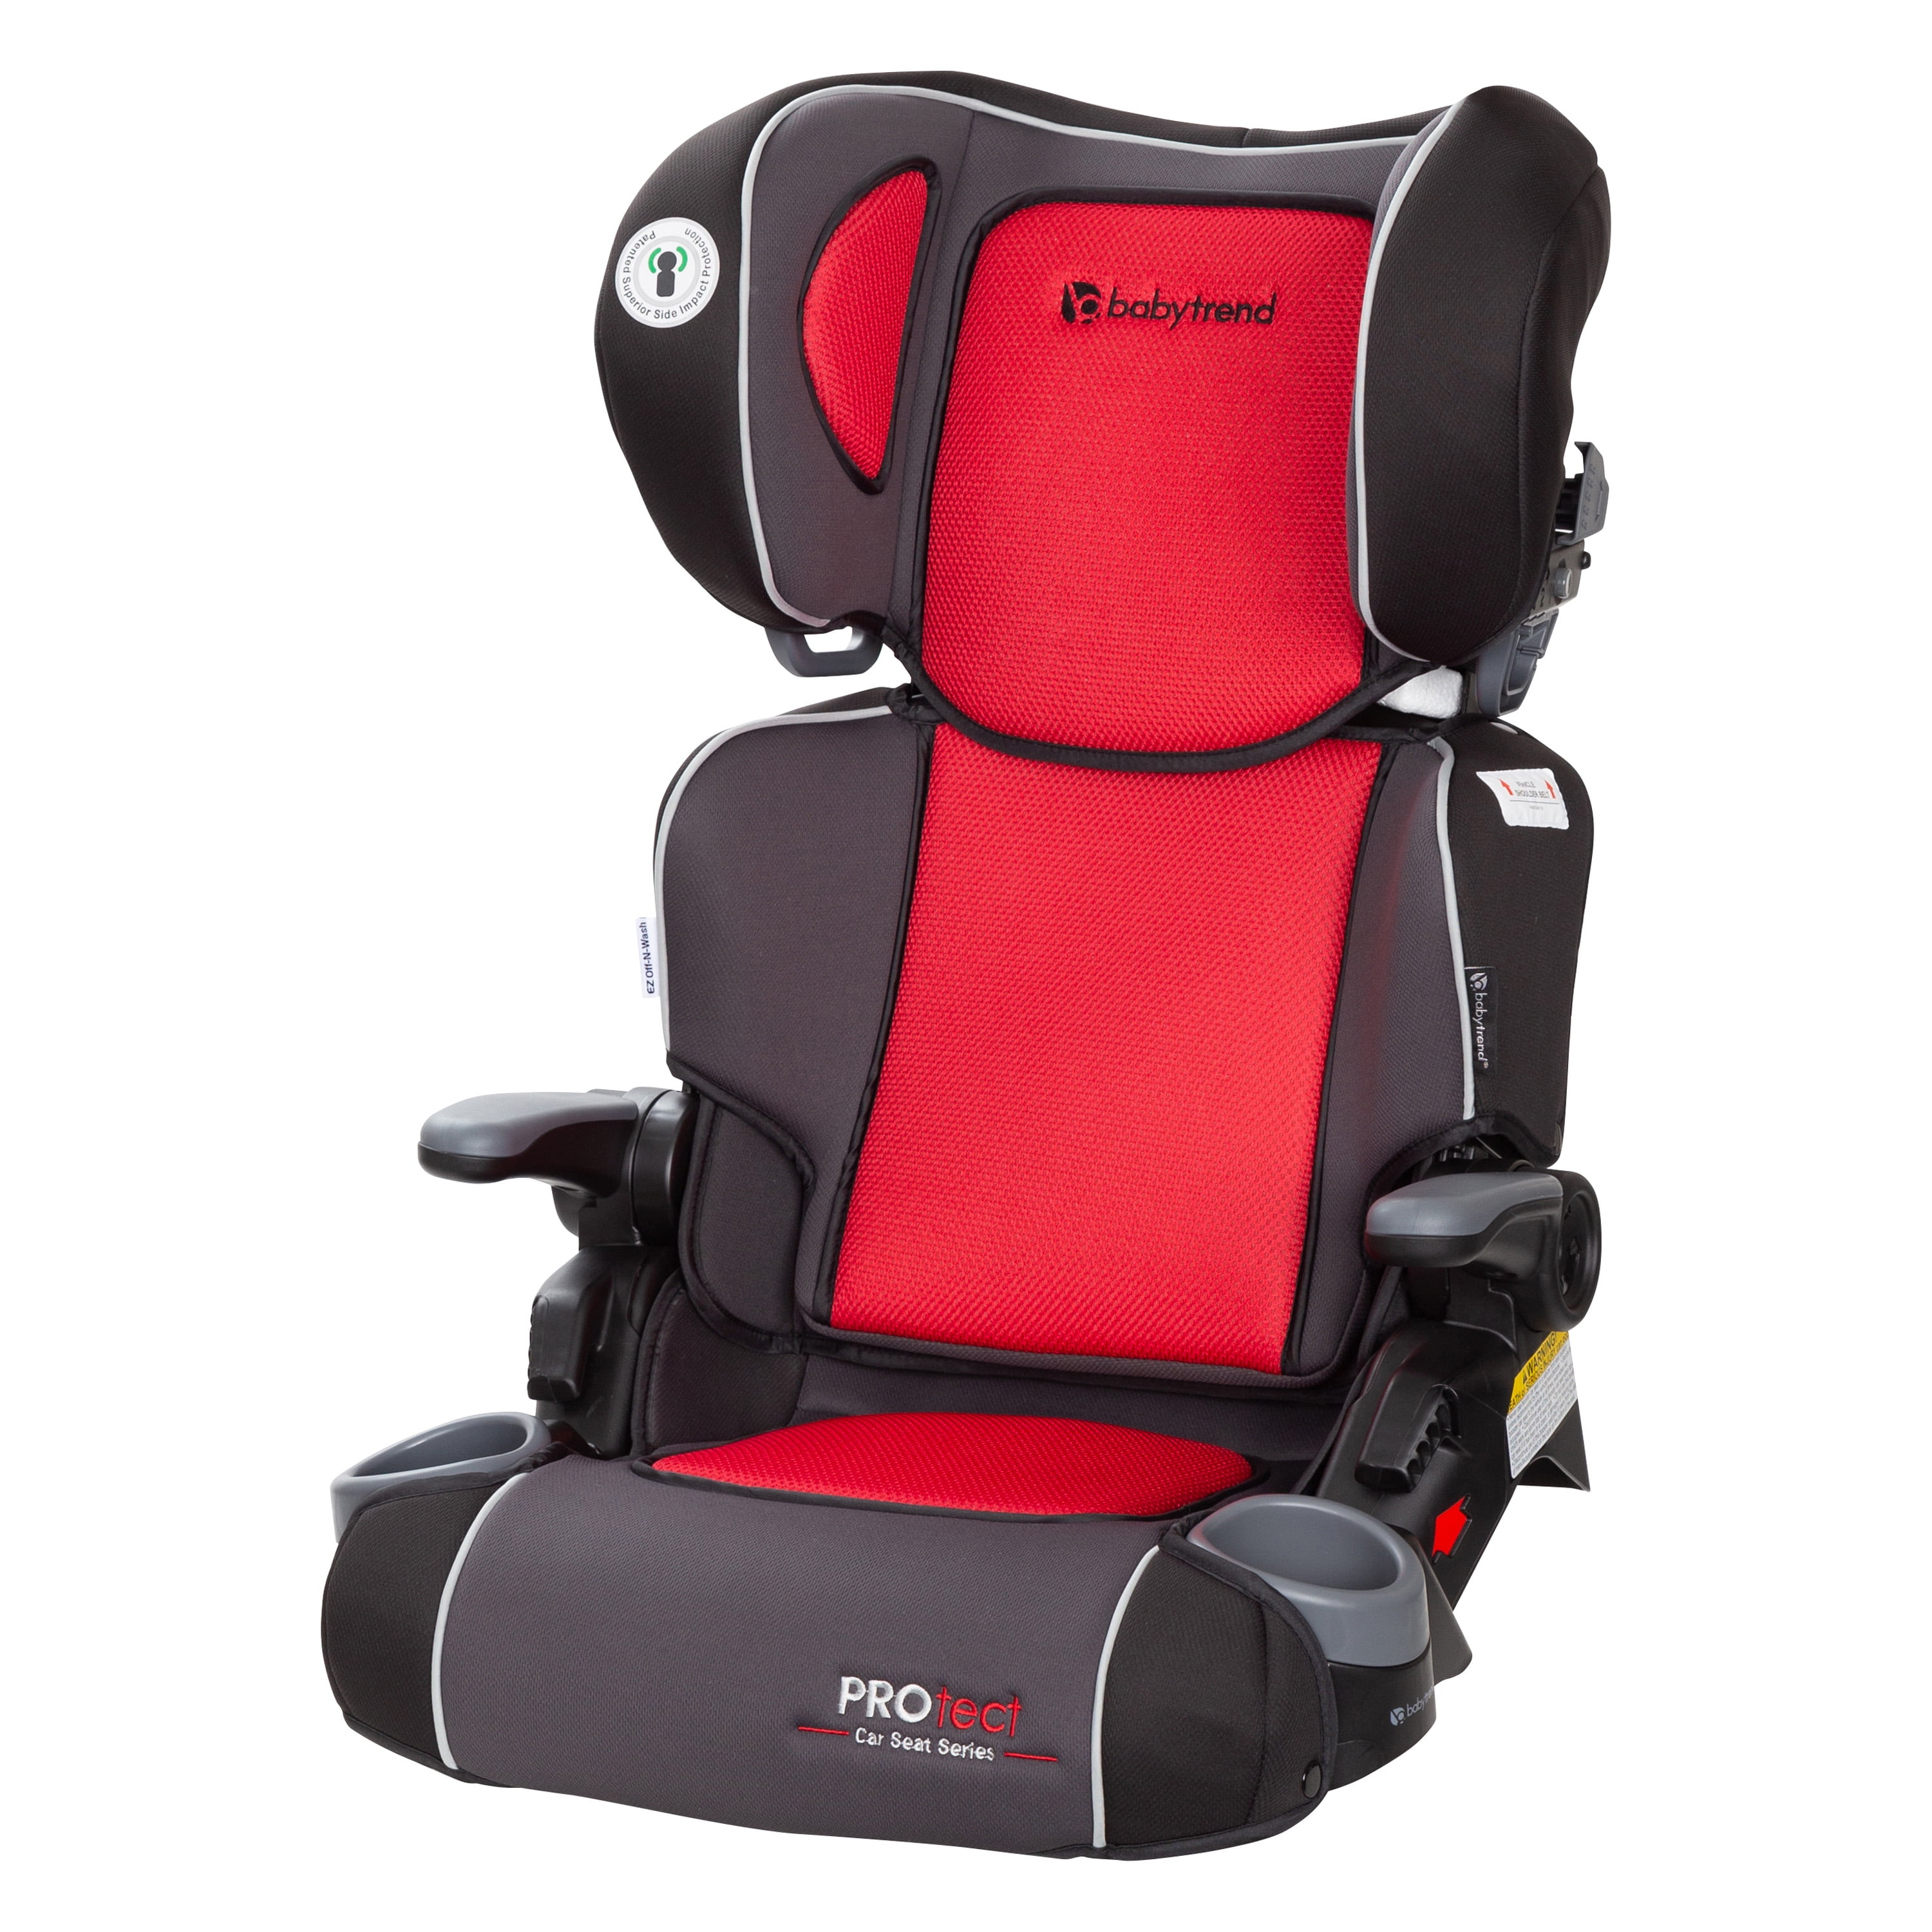 Travel Car Seat For A 5 Year Old, What Group Car Seat For A 5 Year Old